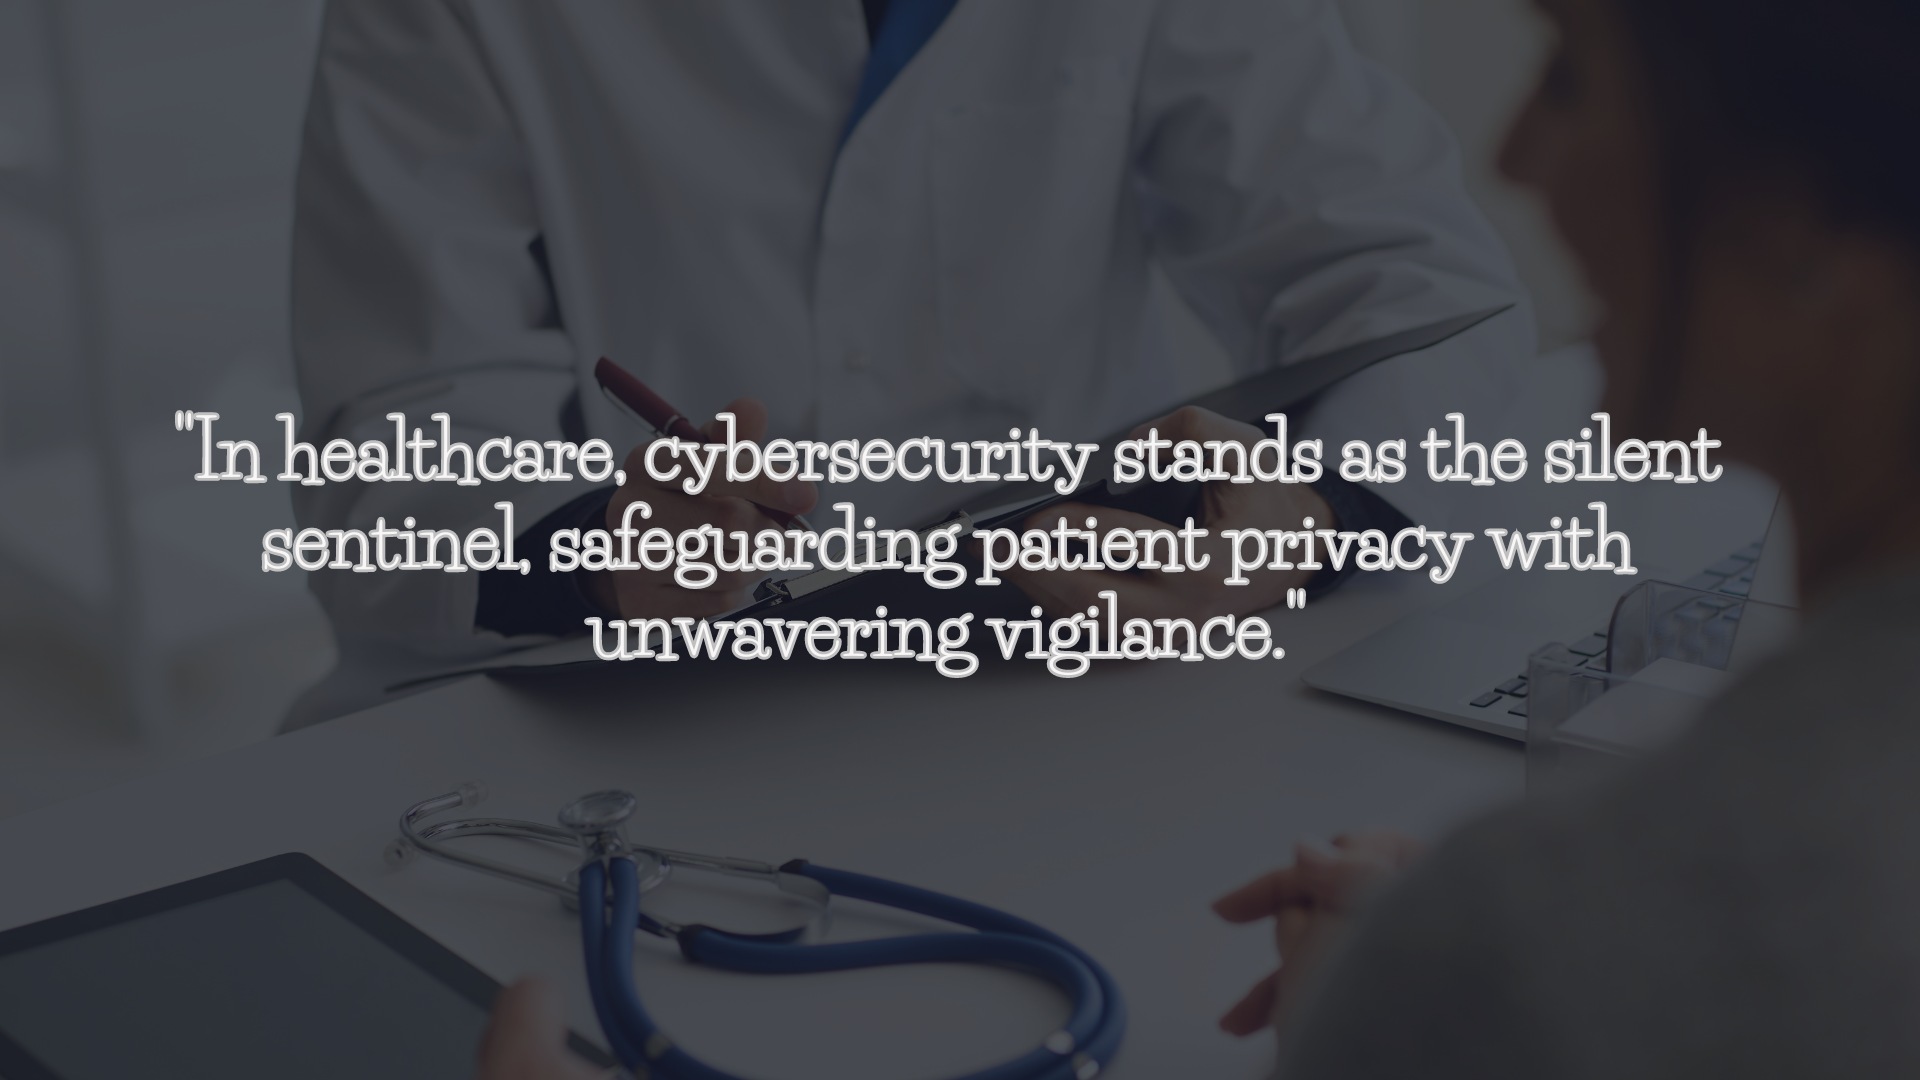 Cybersecurity in healthcare: Protecting patient data